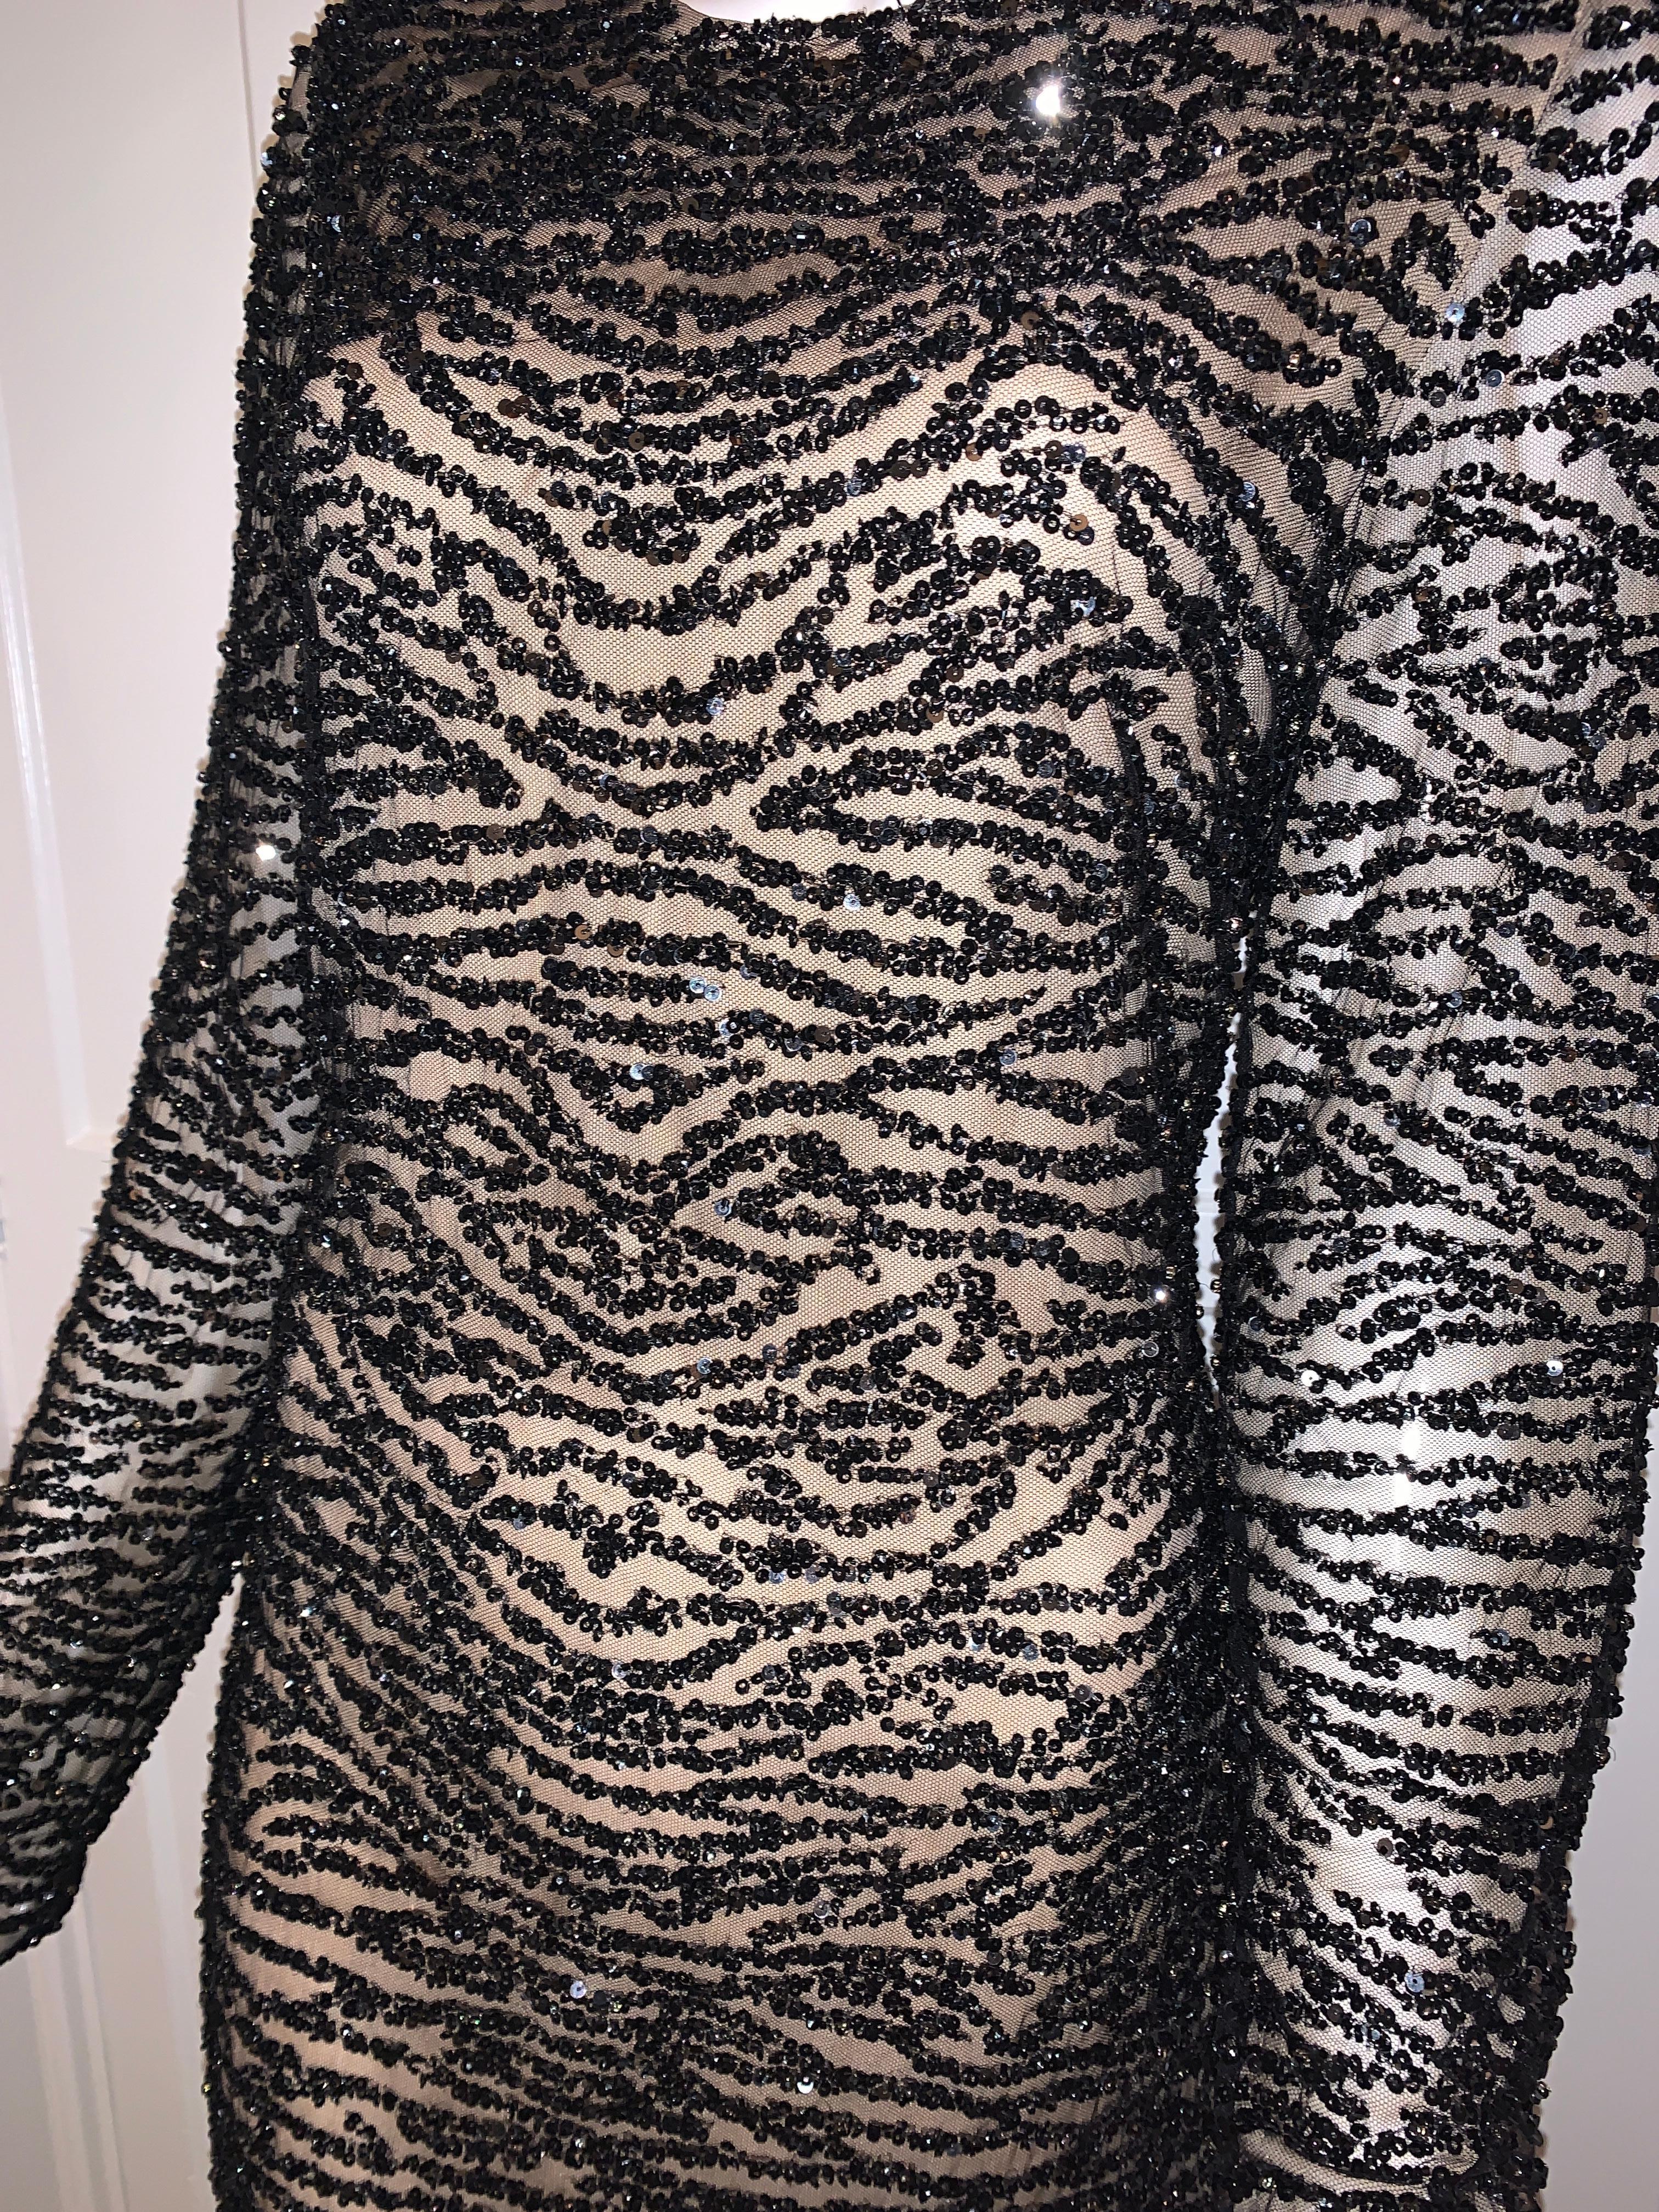 Naeem Khan Black and Cream Beaded Long Sleeve Beaded Cocktail Dress Tags still on. 
Size 12
Long Sleeve and hits below the knee
Black Beaded and Lined (not see through) 
Zipper back 
Such a glamorous, classy dress ! 

Retail $2995 + 
